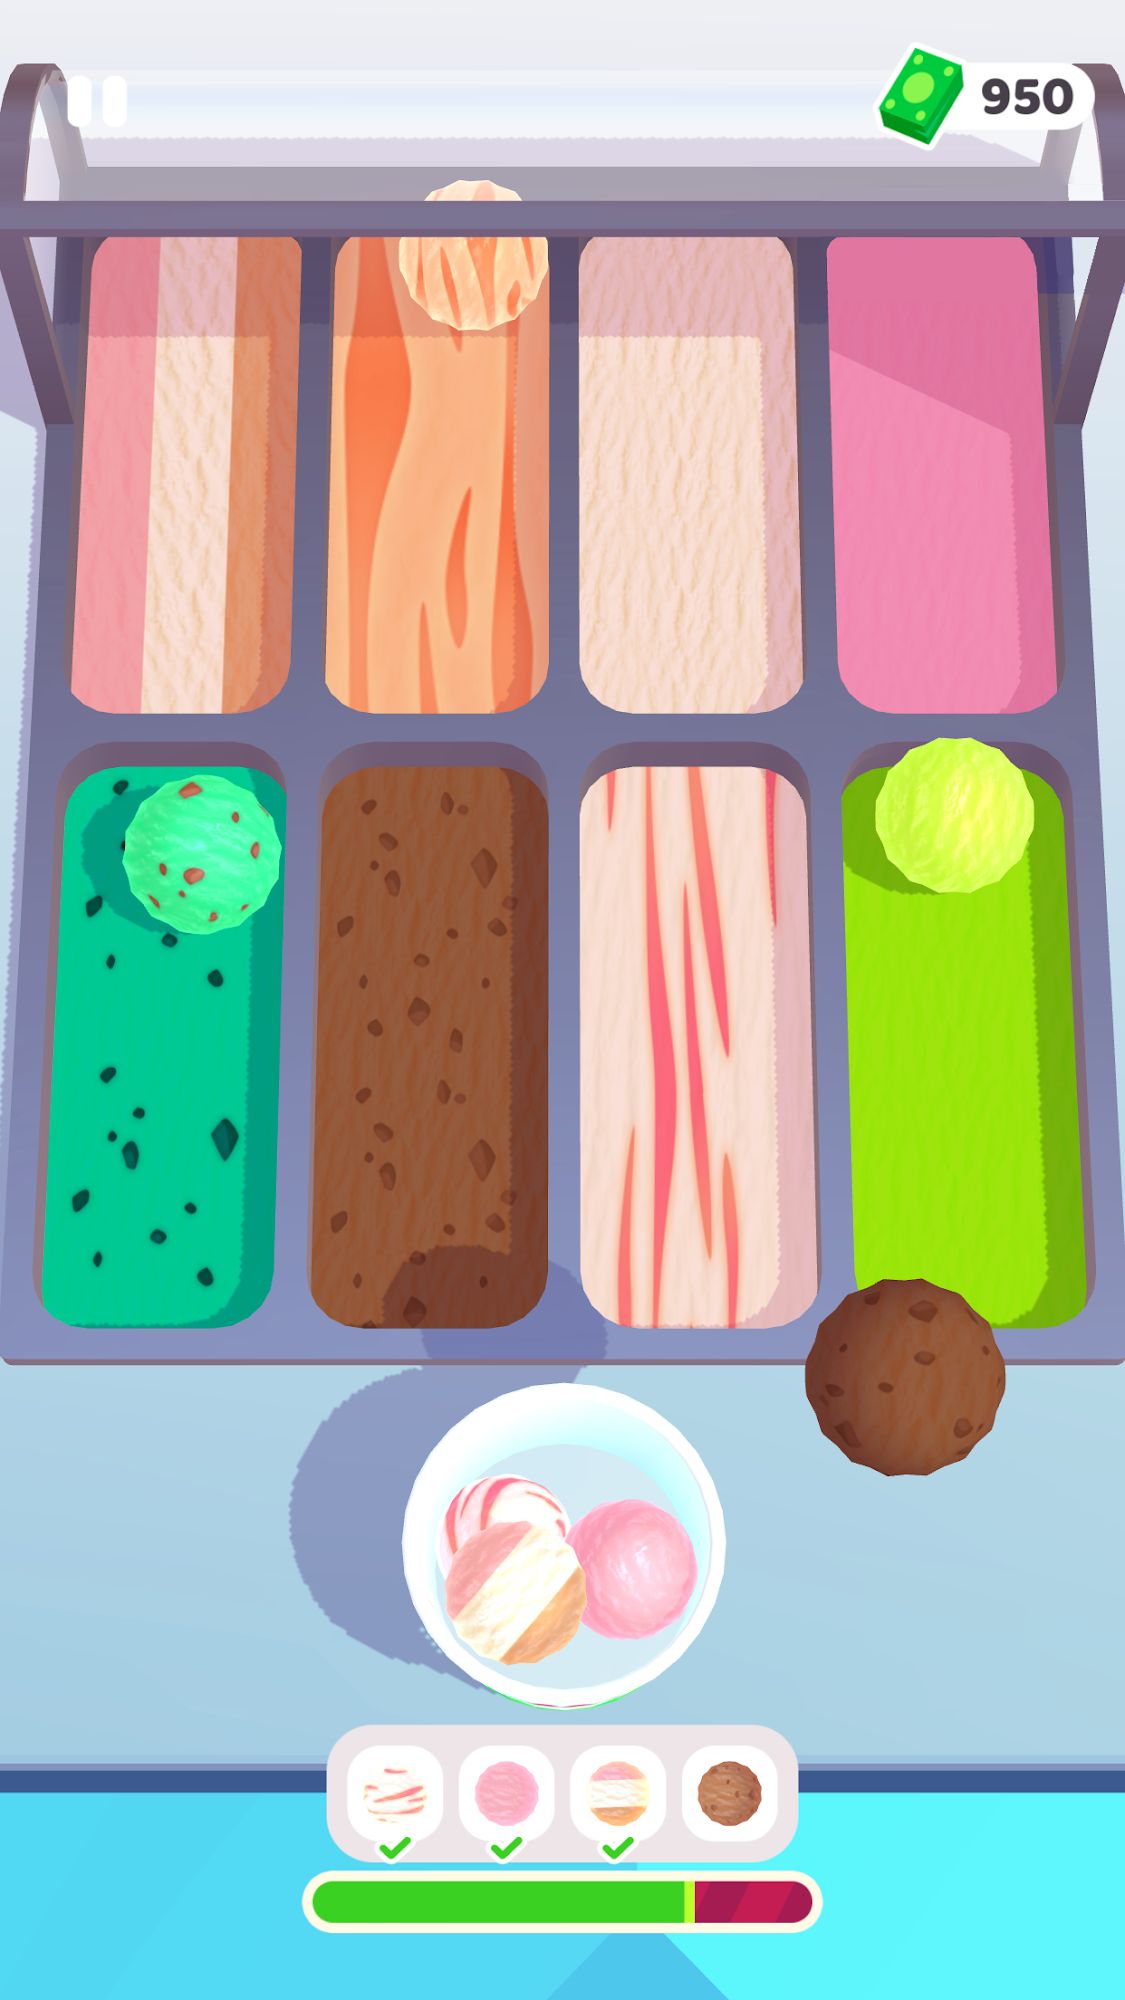 Full version of Android Cooking game apk Mini Market - Cooking Game for tablet and phone.